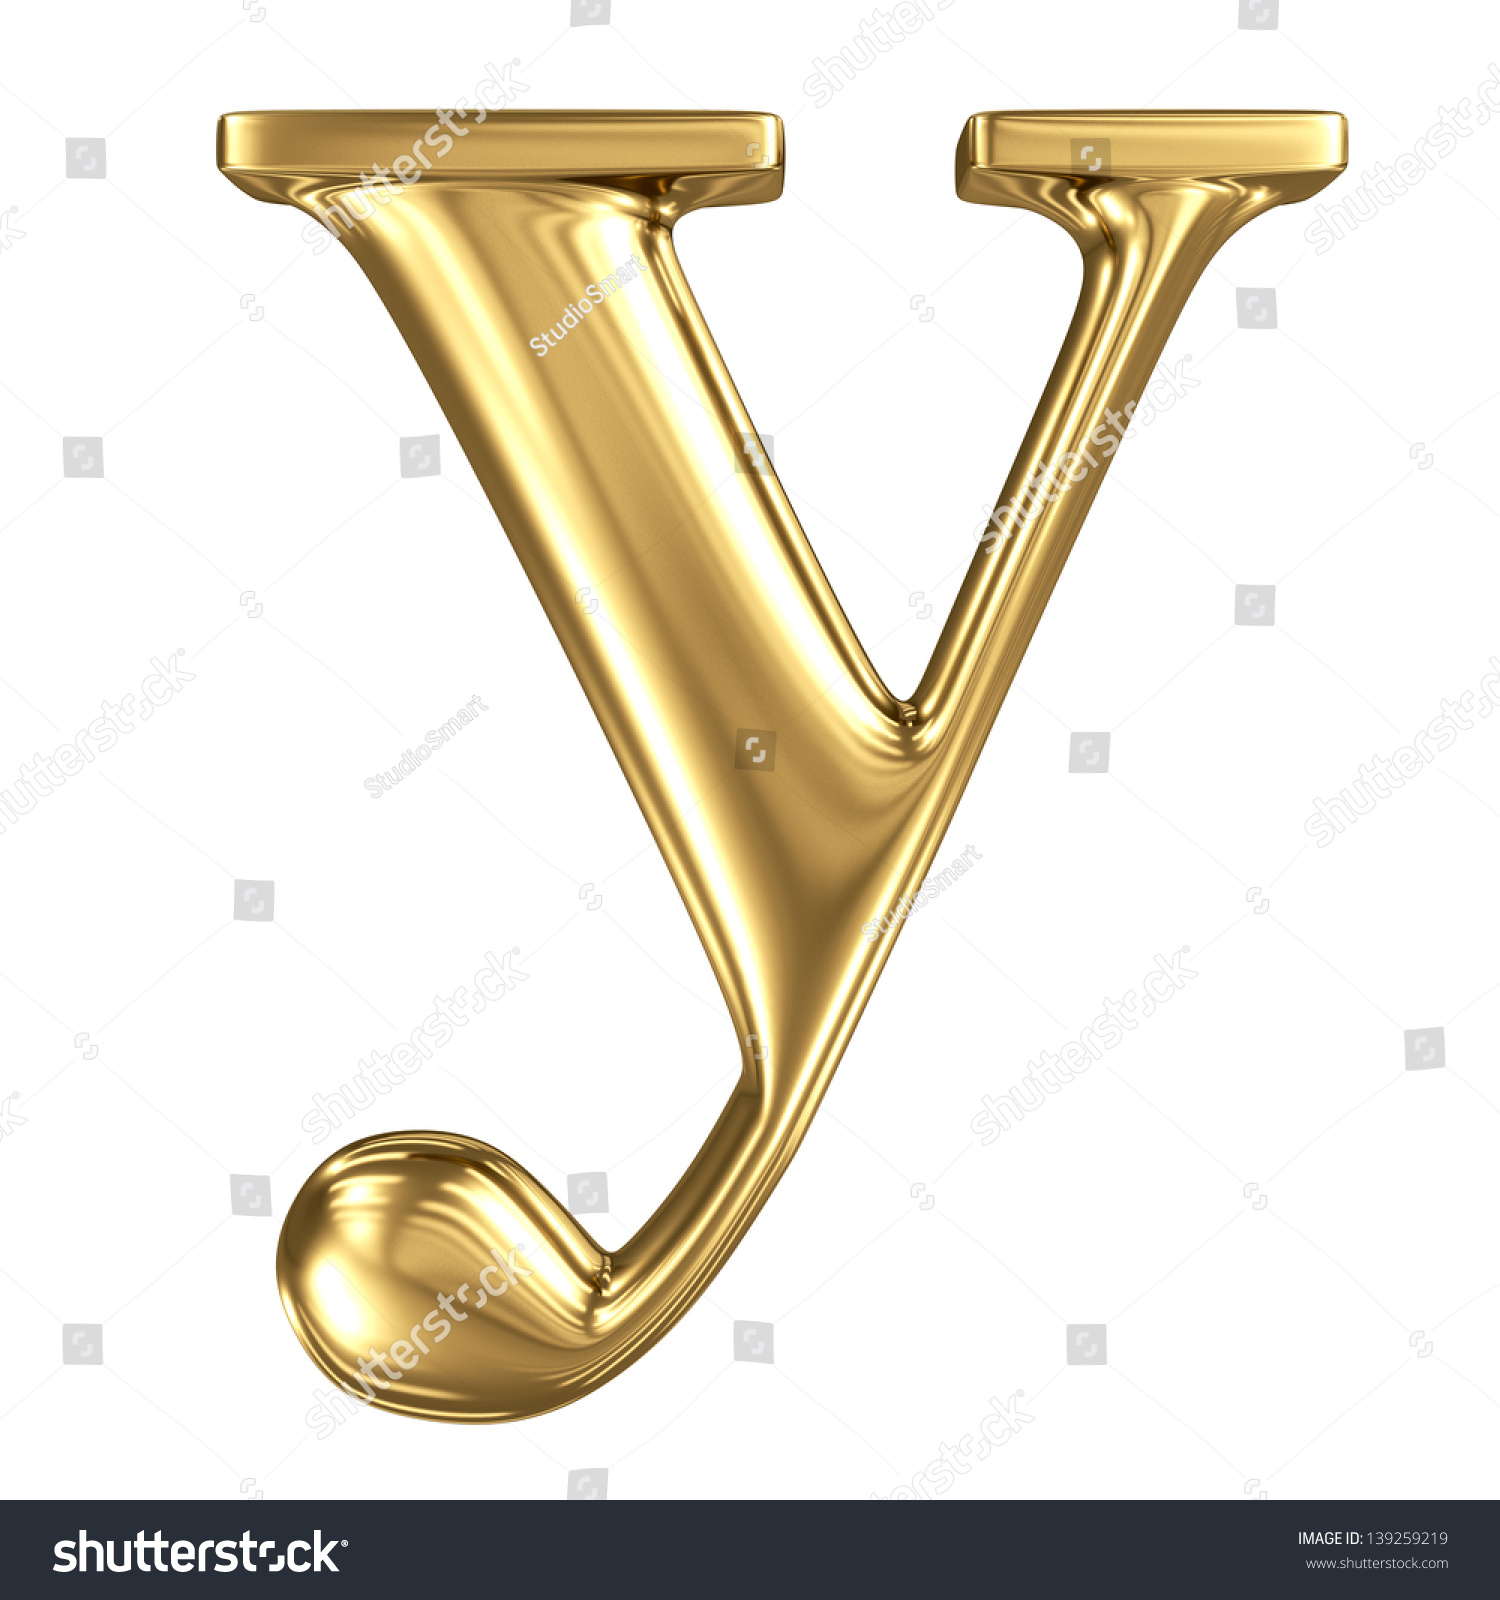 Golden Letter Y Lowercase High Quality Stock Illustration 139259219 ...